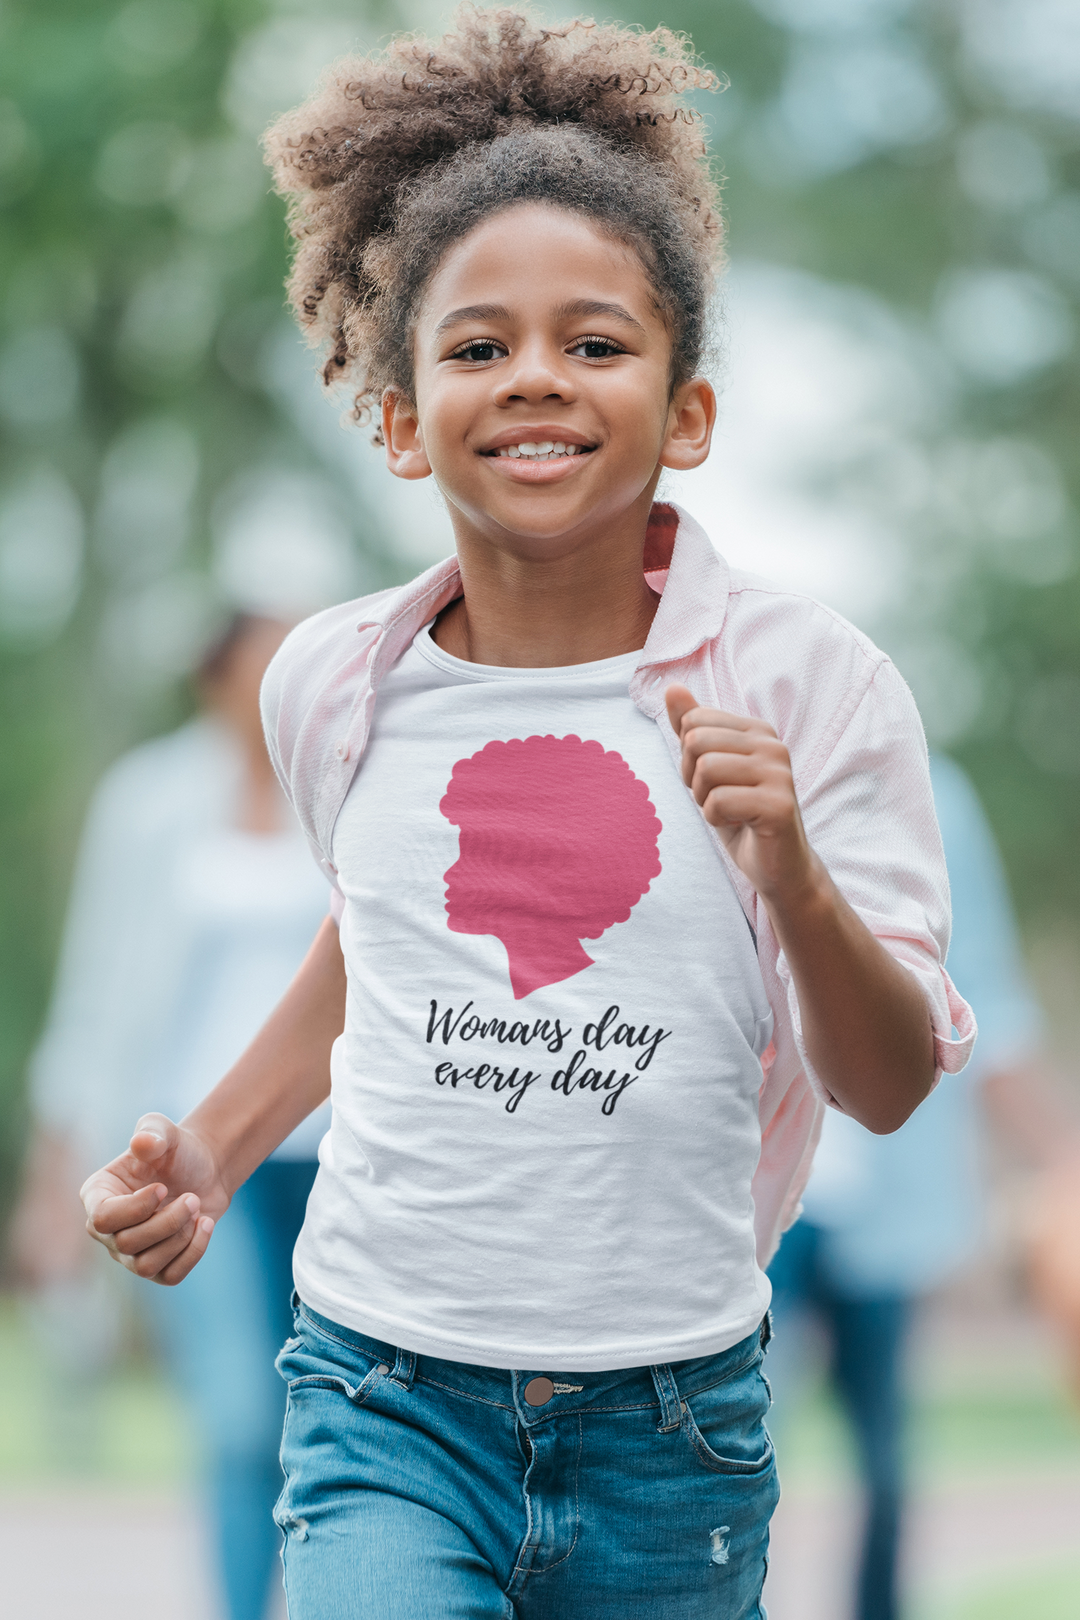 Woman's Day every day. Girl power t-shirts for Toddlers and Kids.